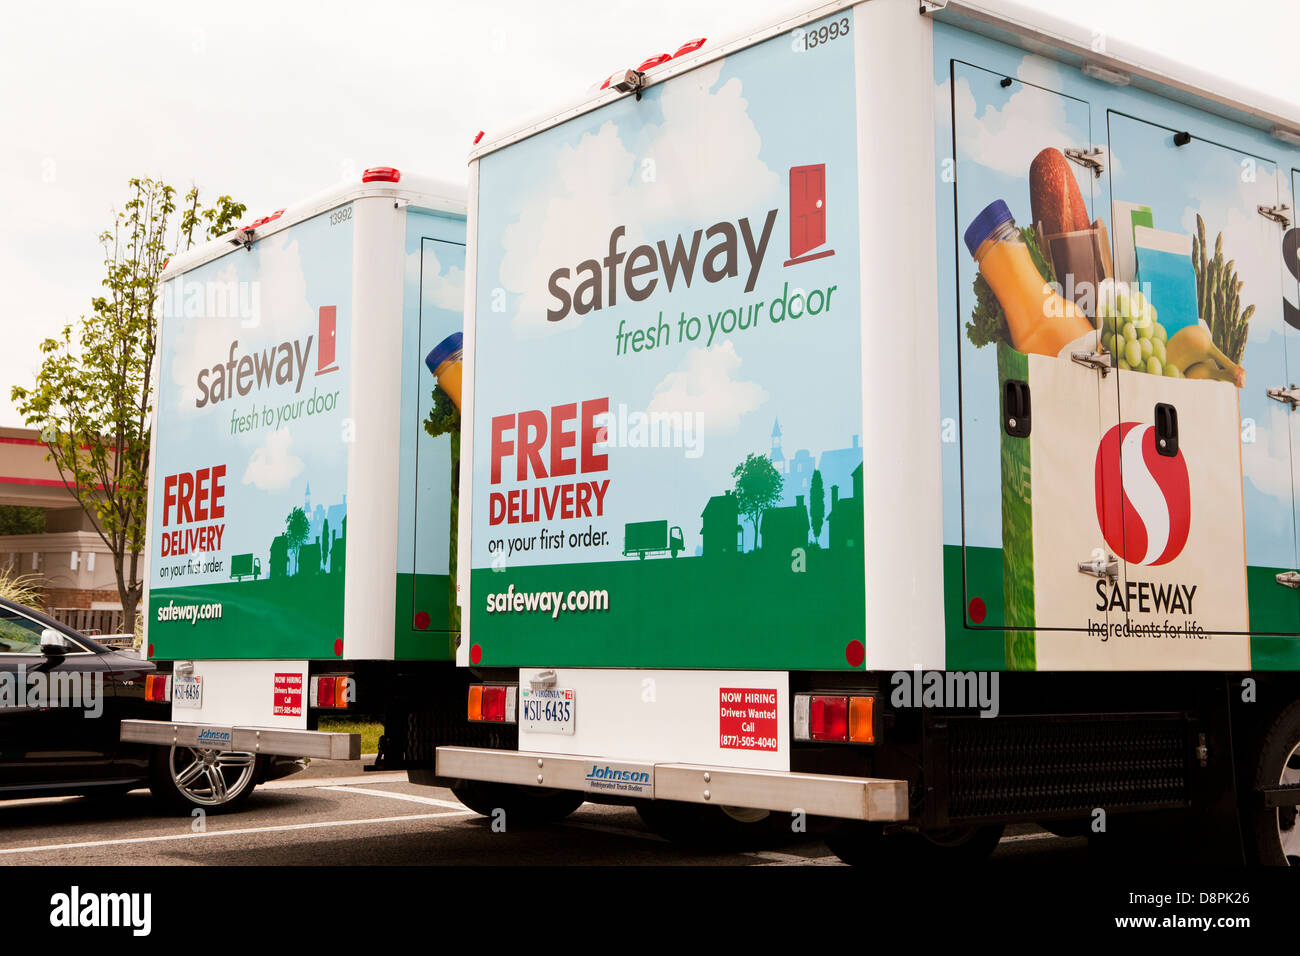 Safeway home delivery trucks Stock Photo